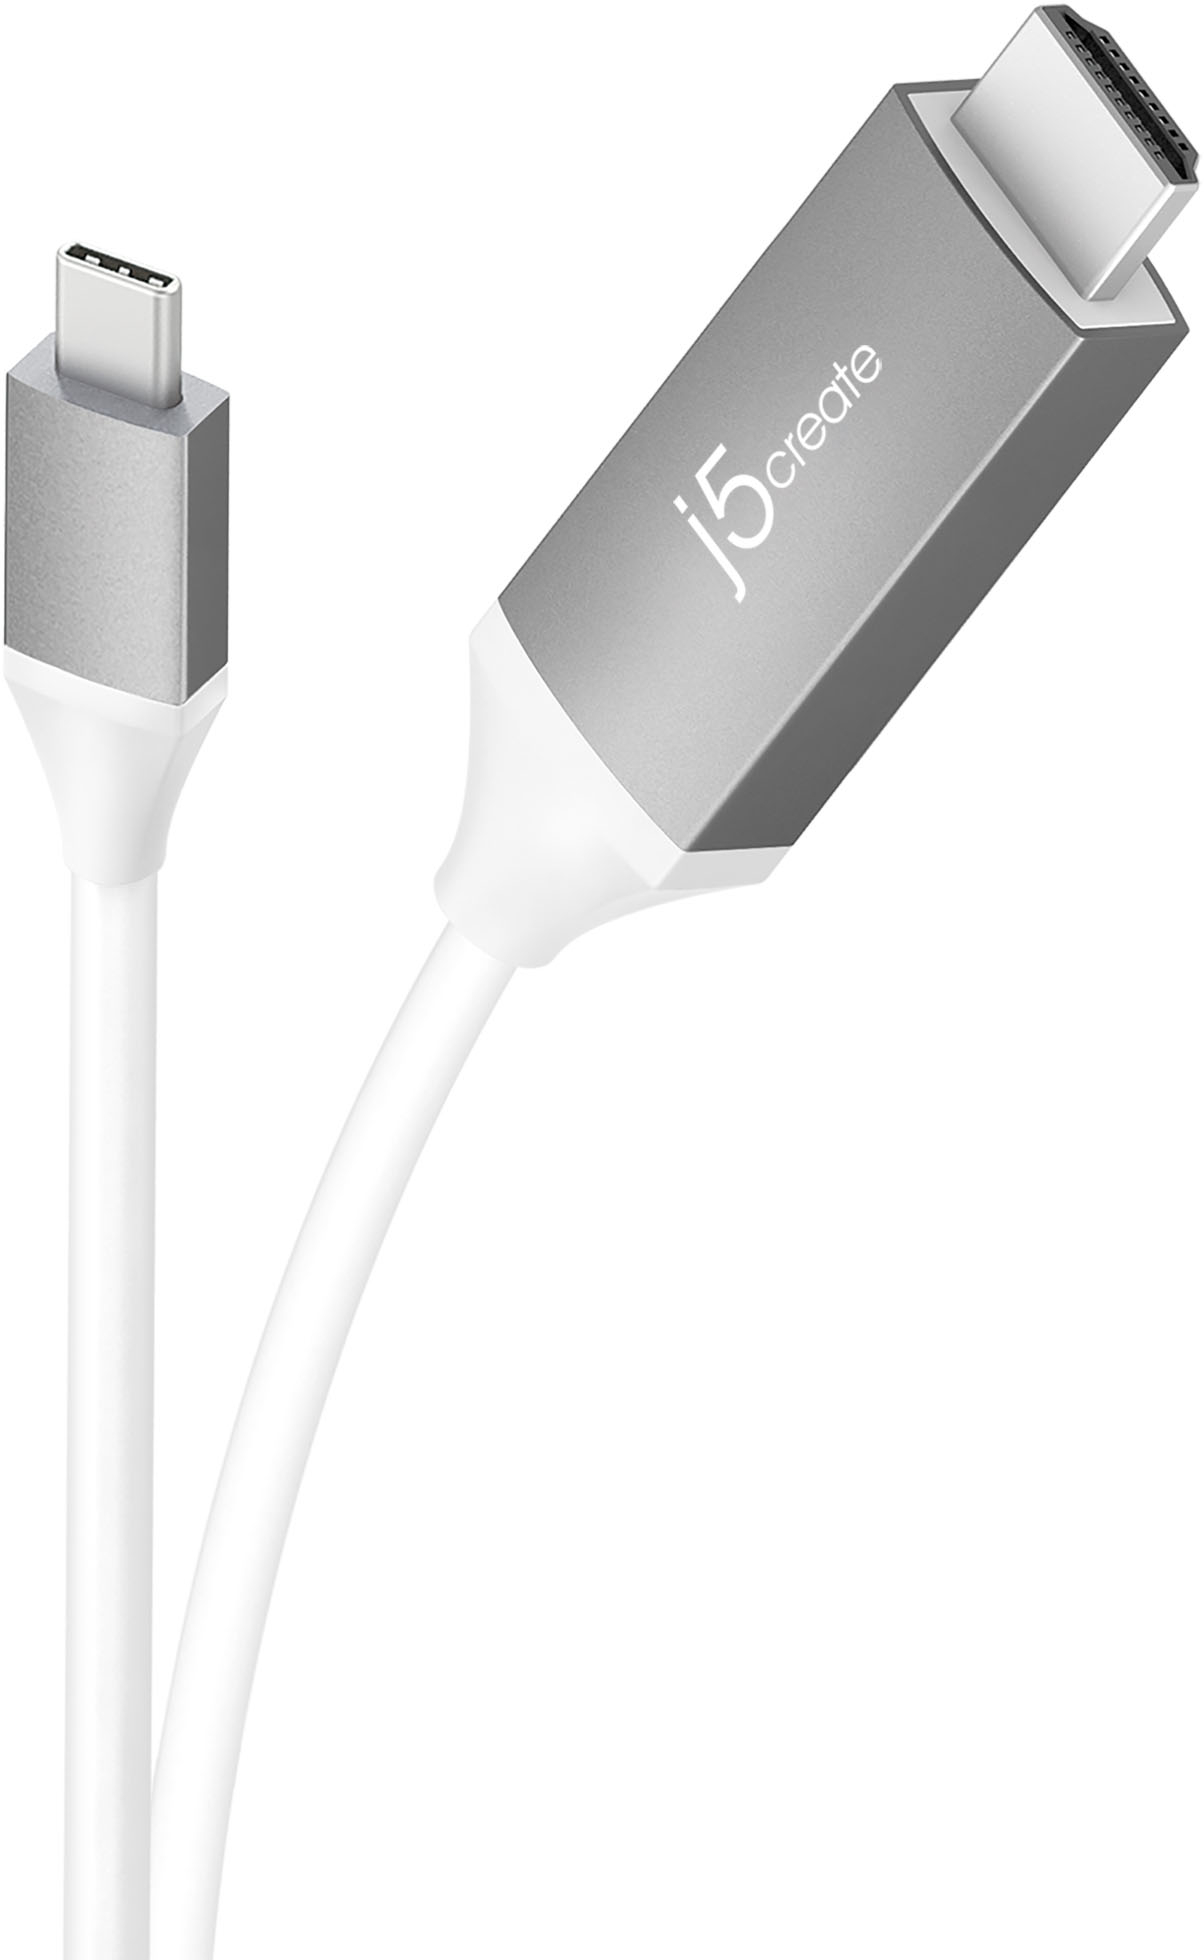 Angle View: j5create - USB-C to 4K HDMI Cable - Gray